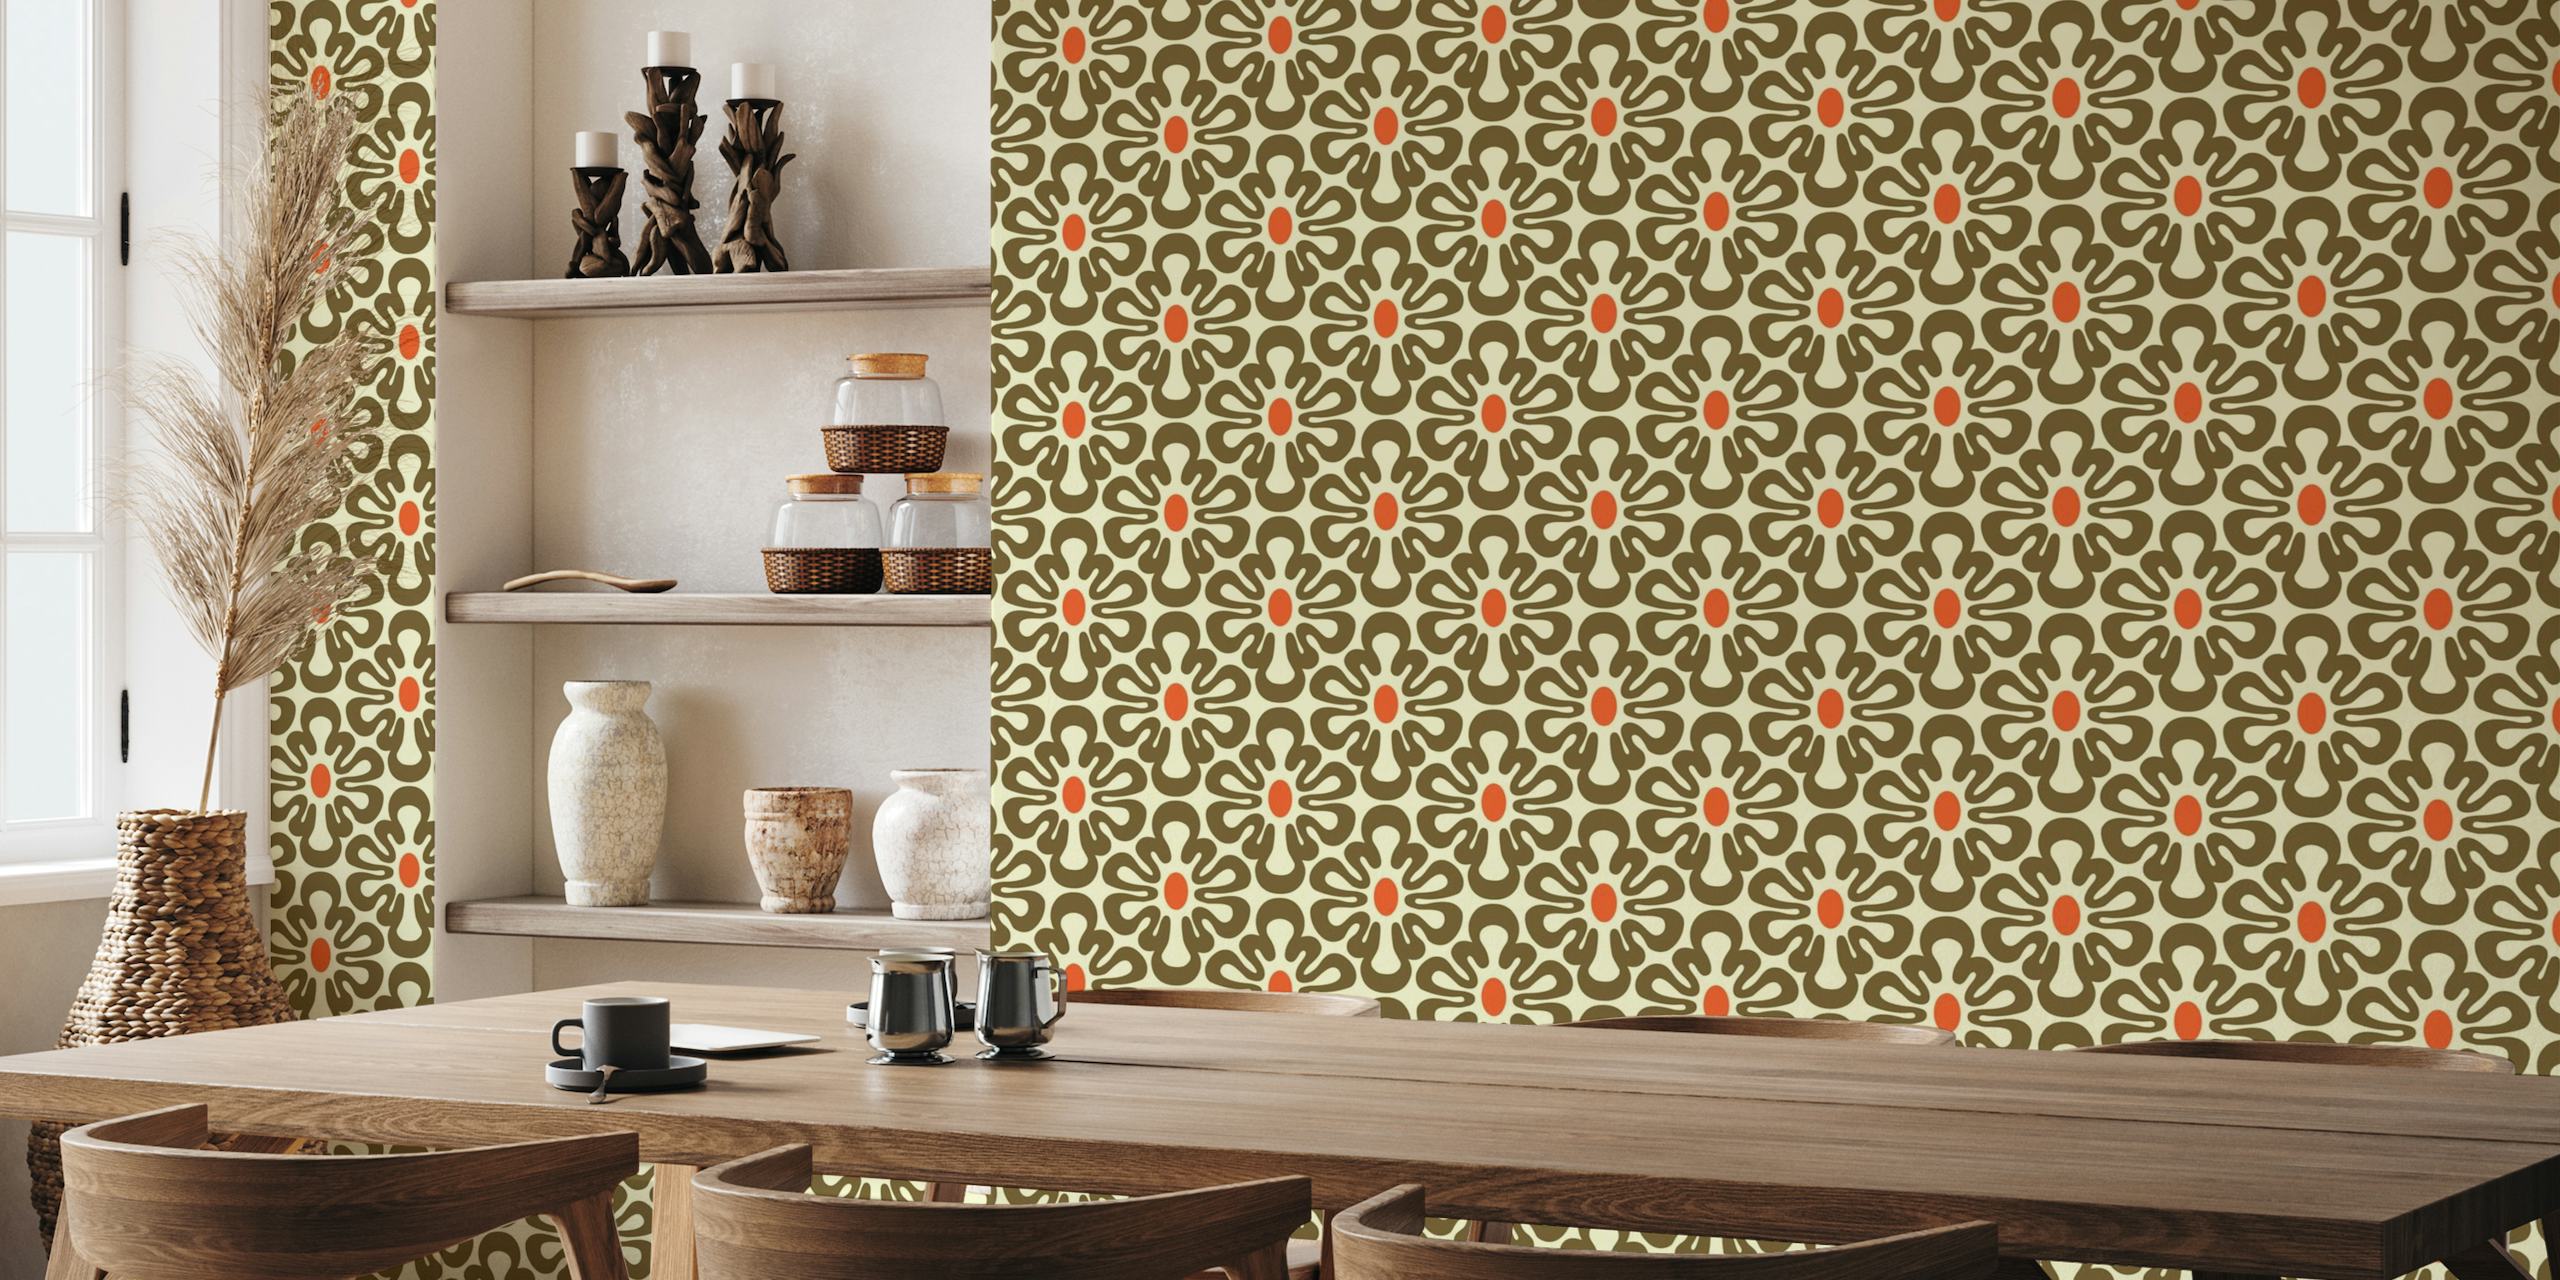 2625 A - abstract retro shapes pattern tapetit